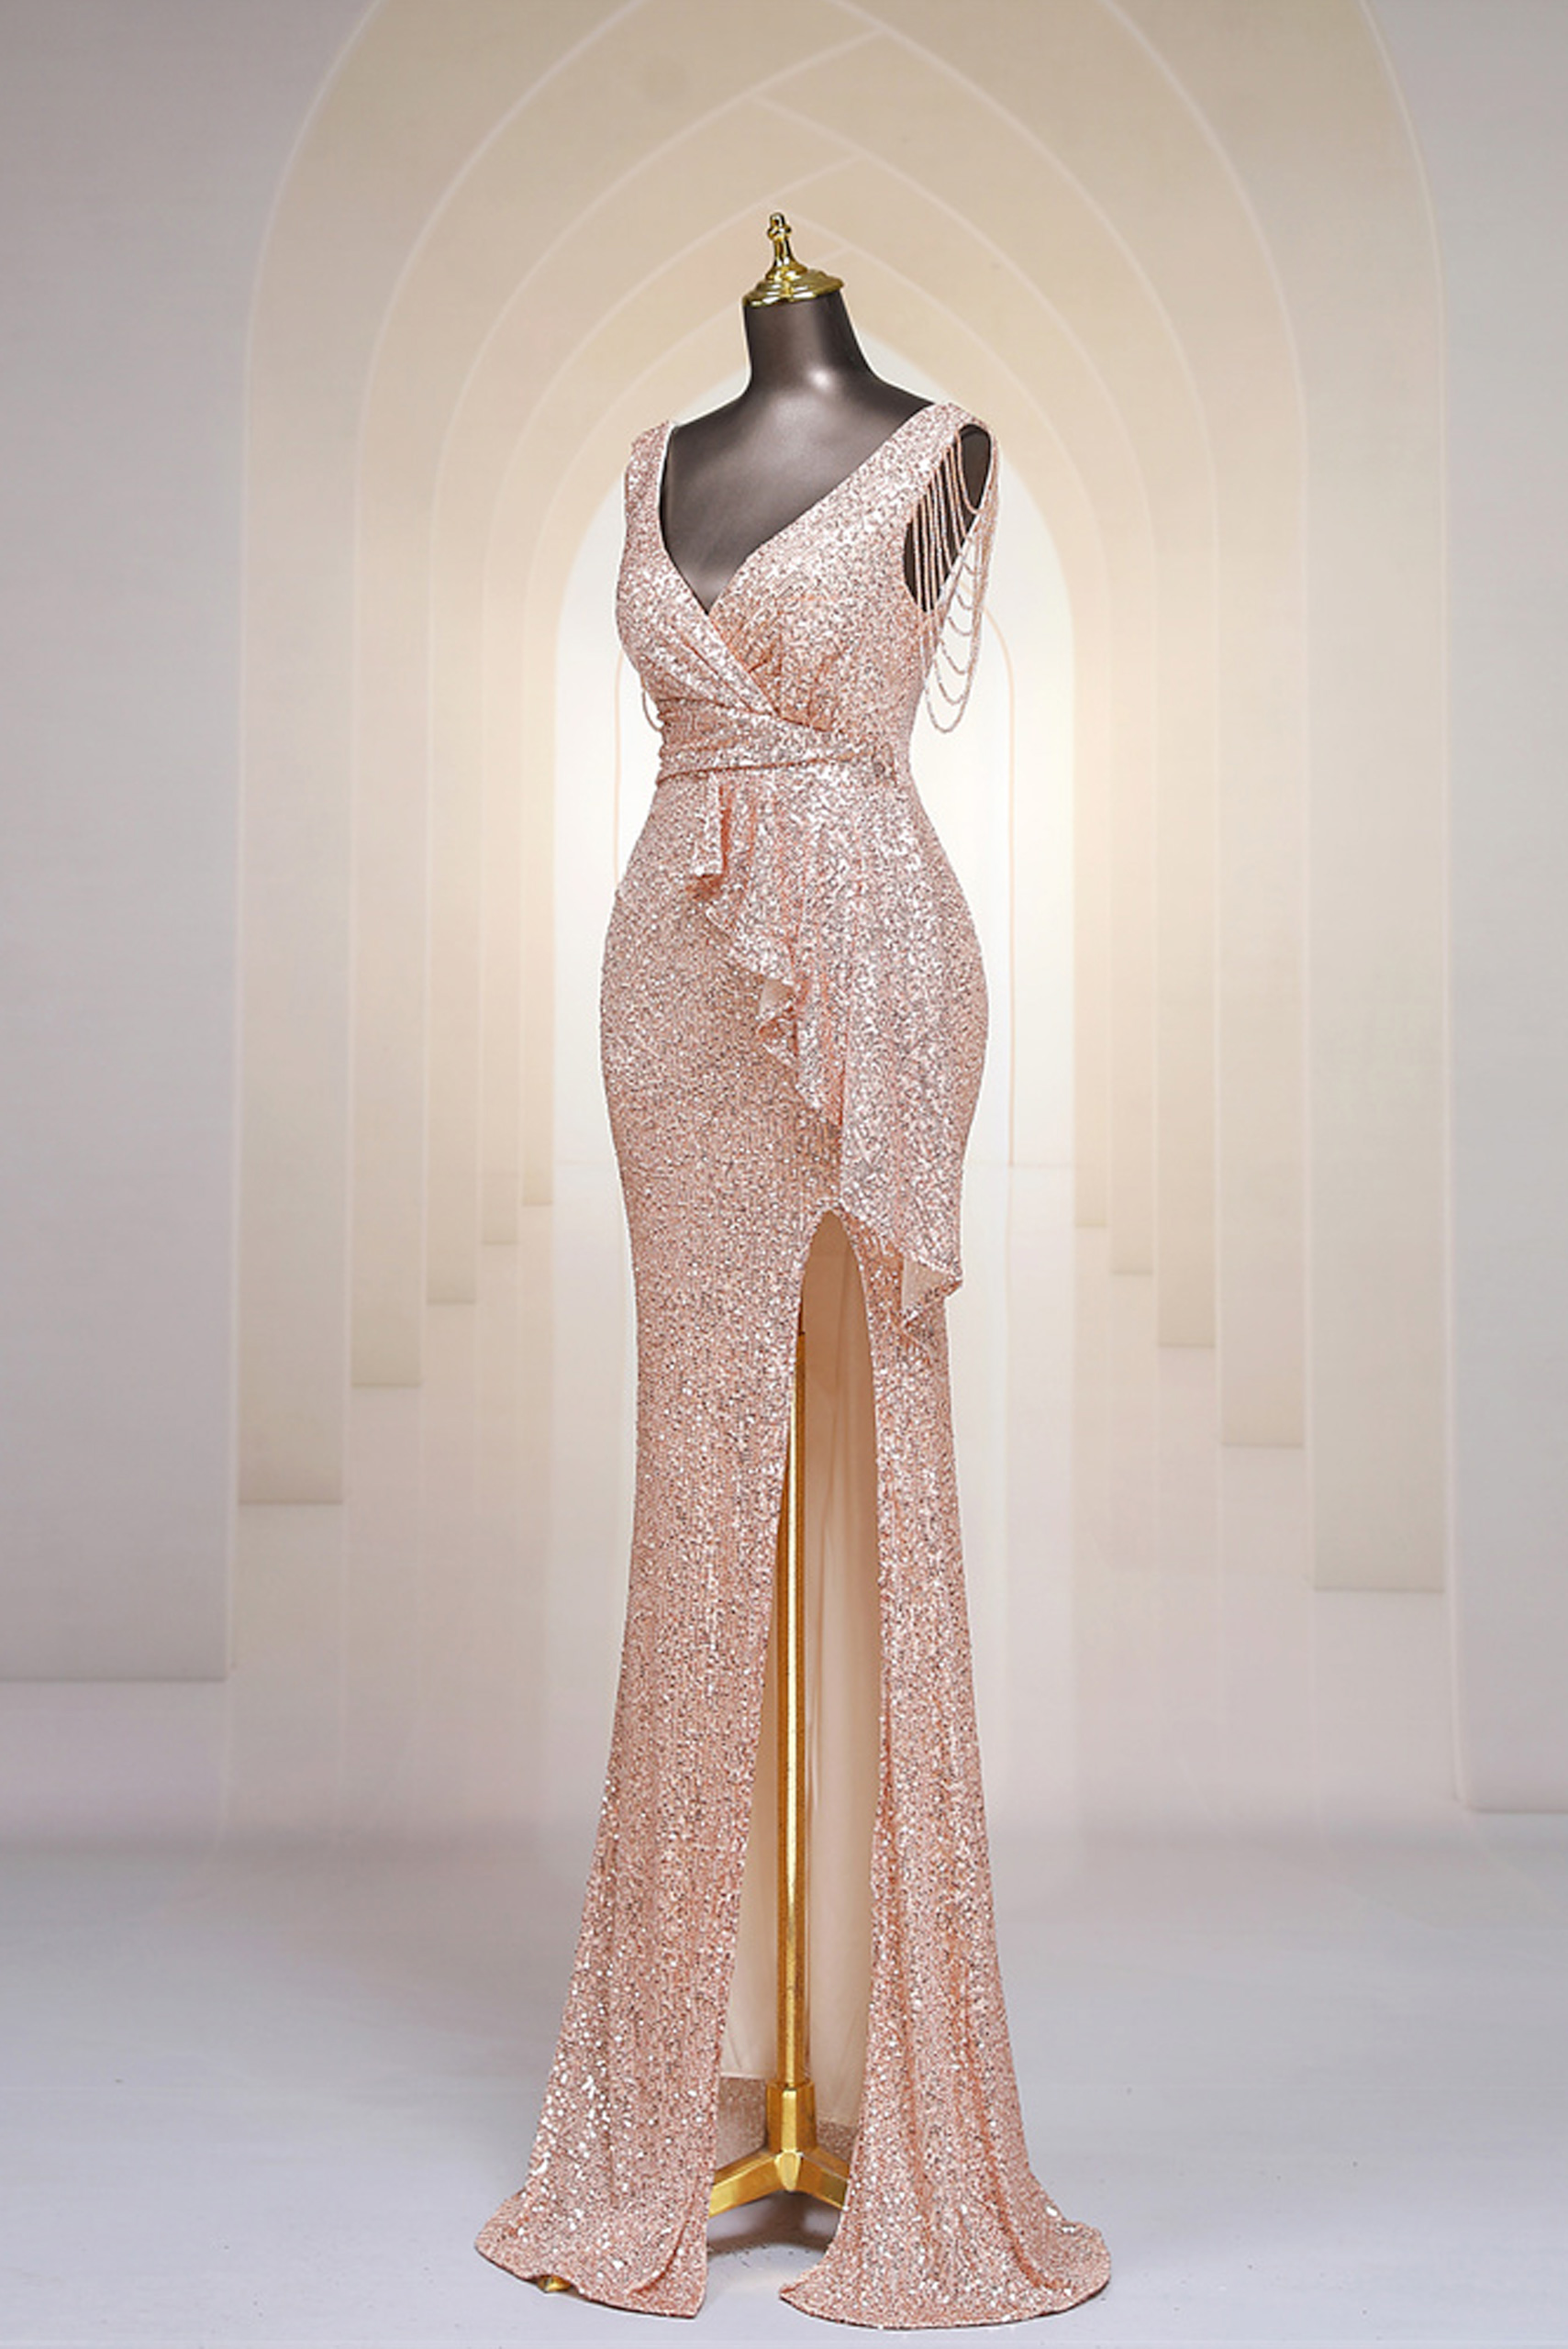 rochie-paiete-gold-rose-amarant-lateral-2